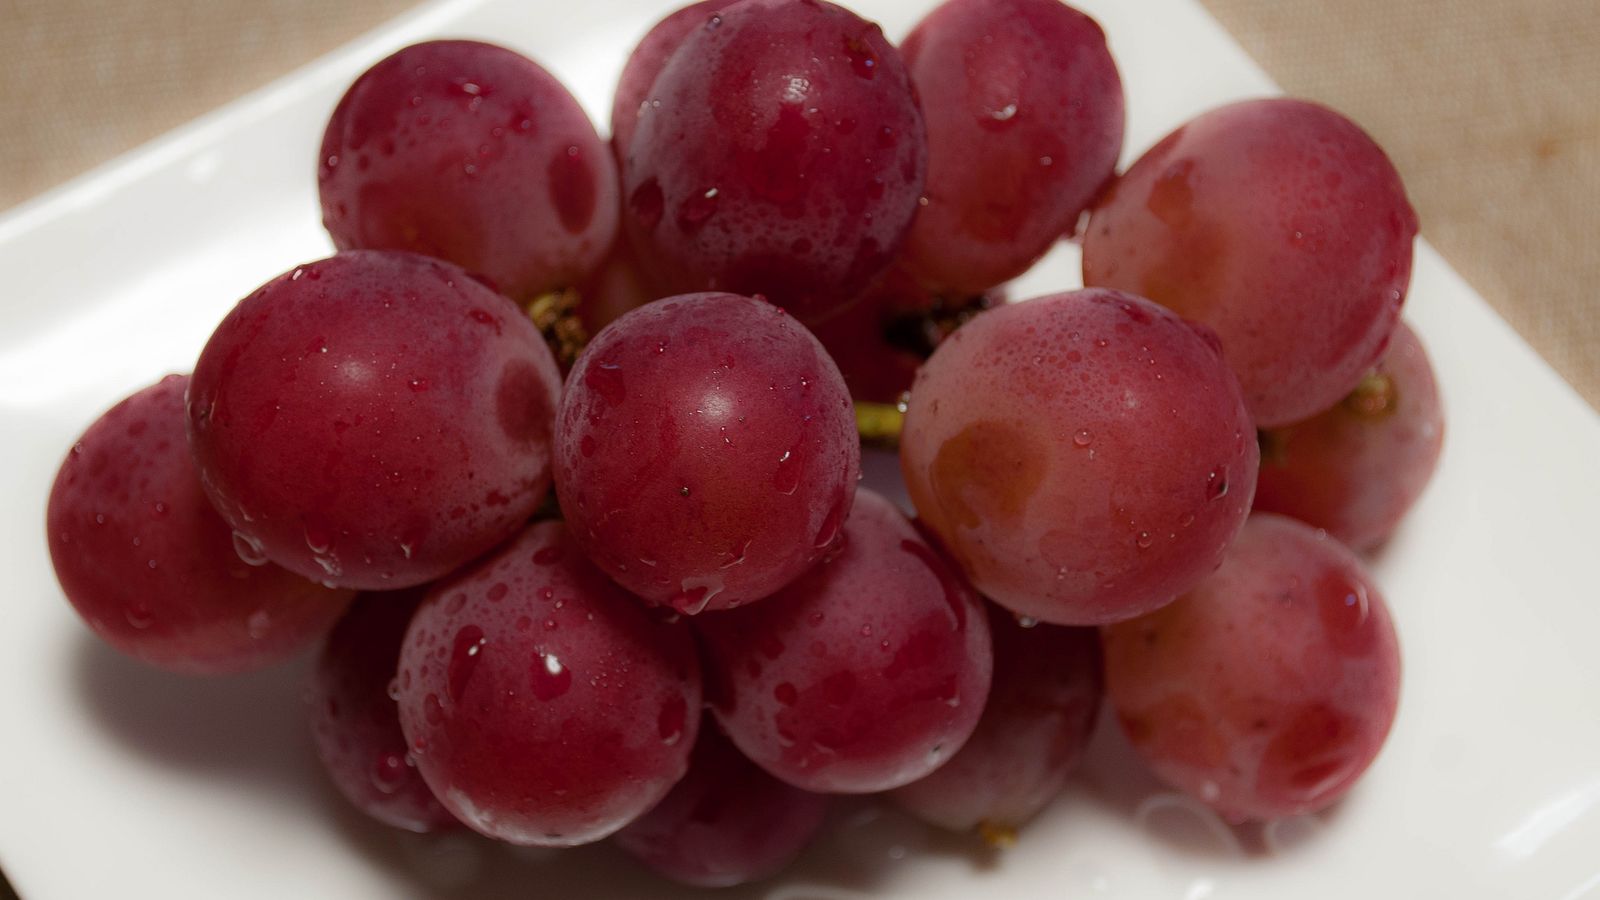 One Bunch of Grapes Just Sold for $11,000 in Japan photo